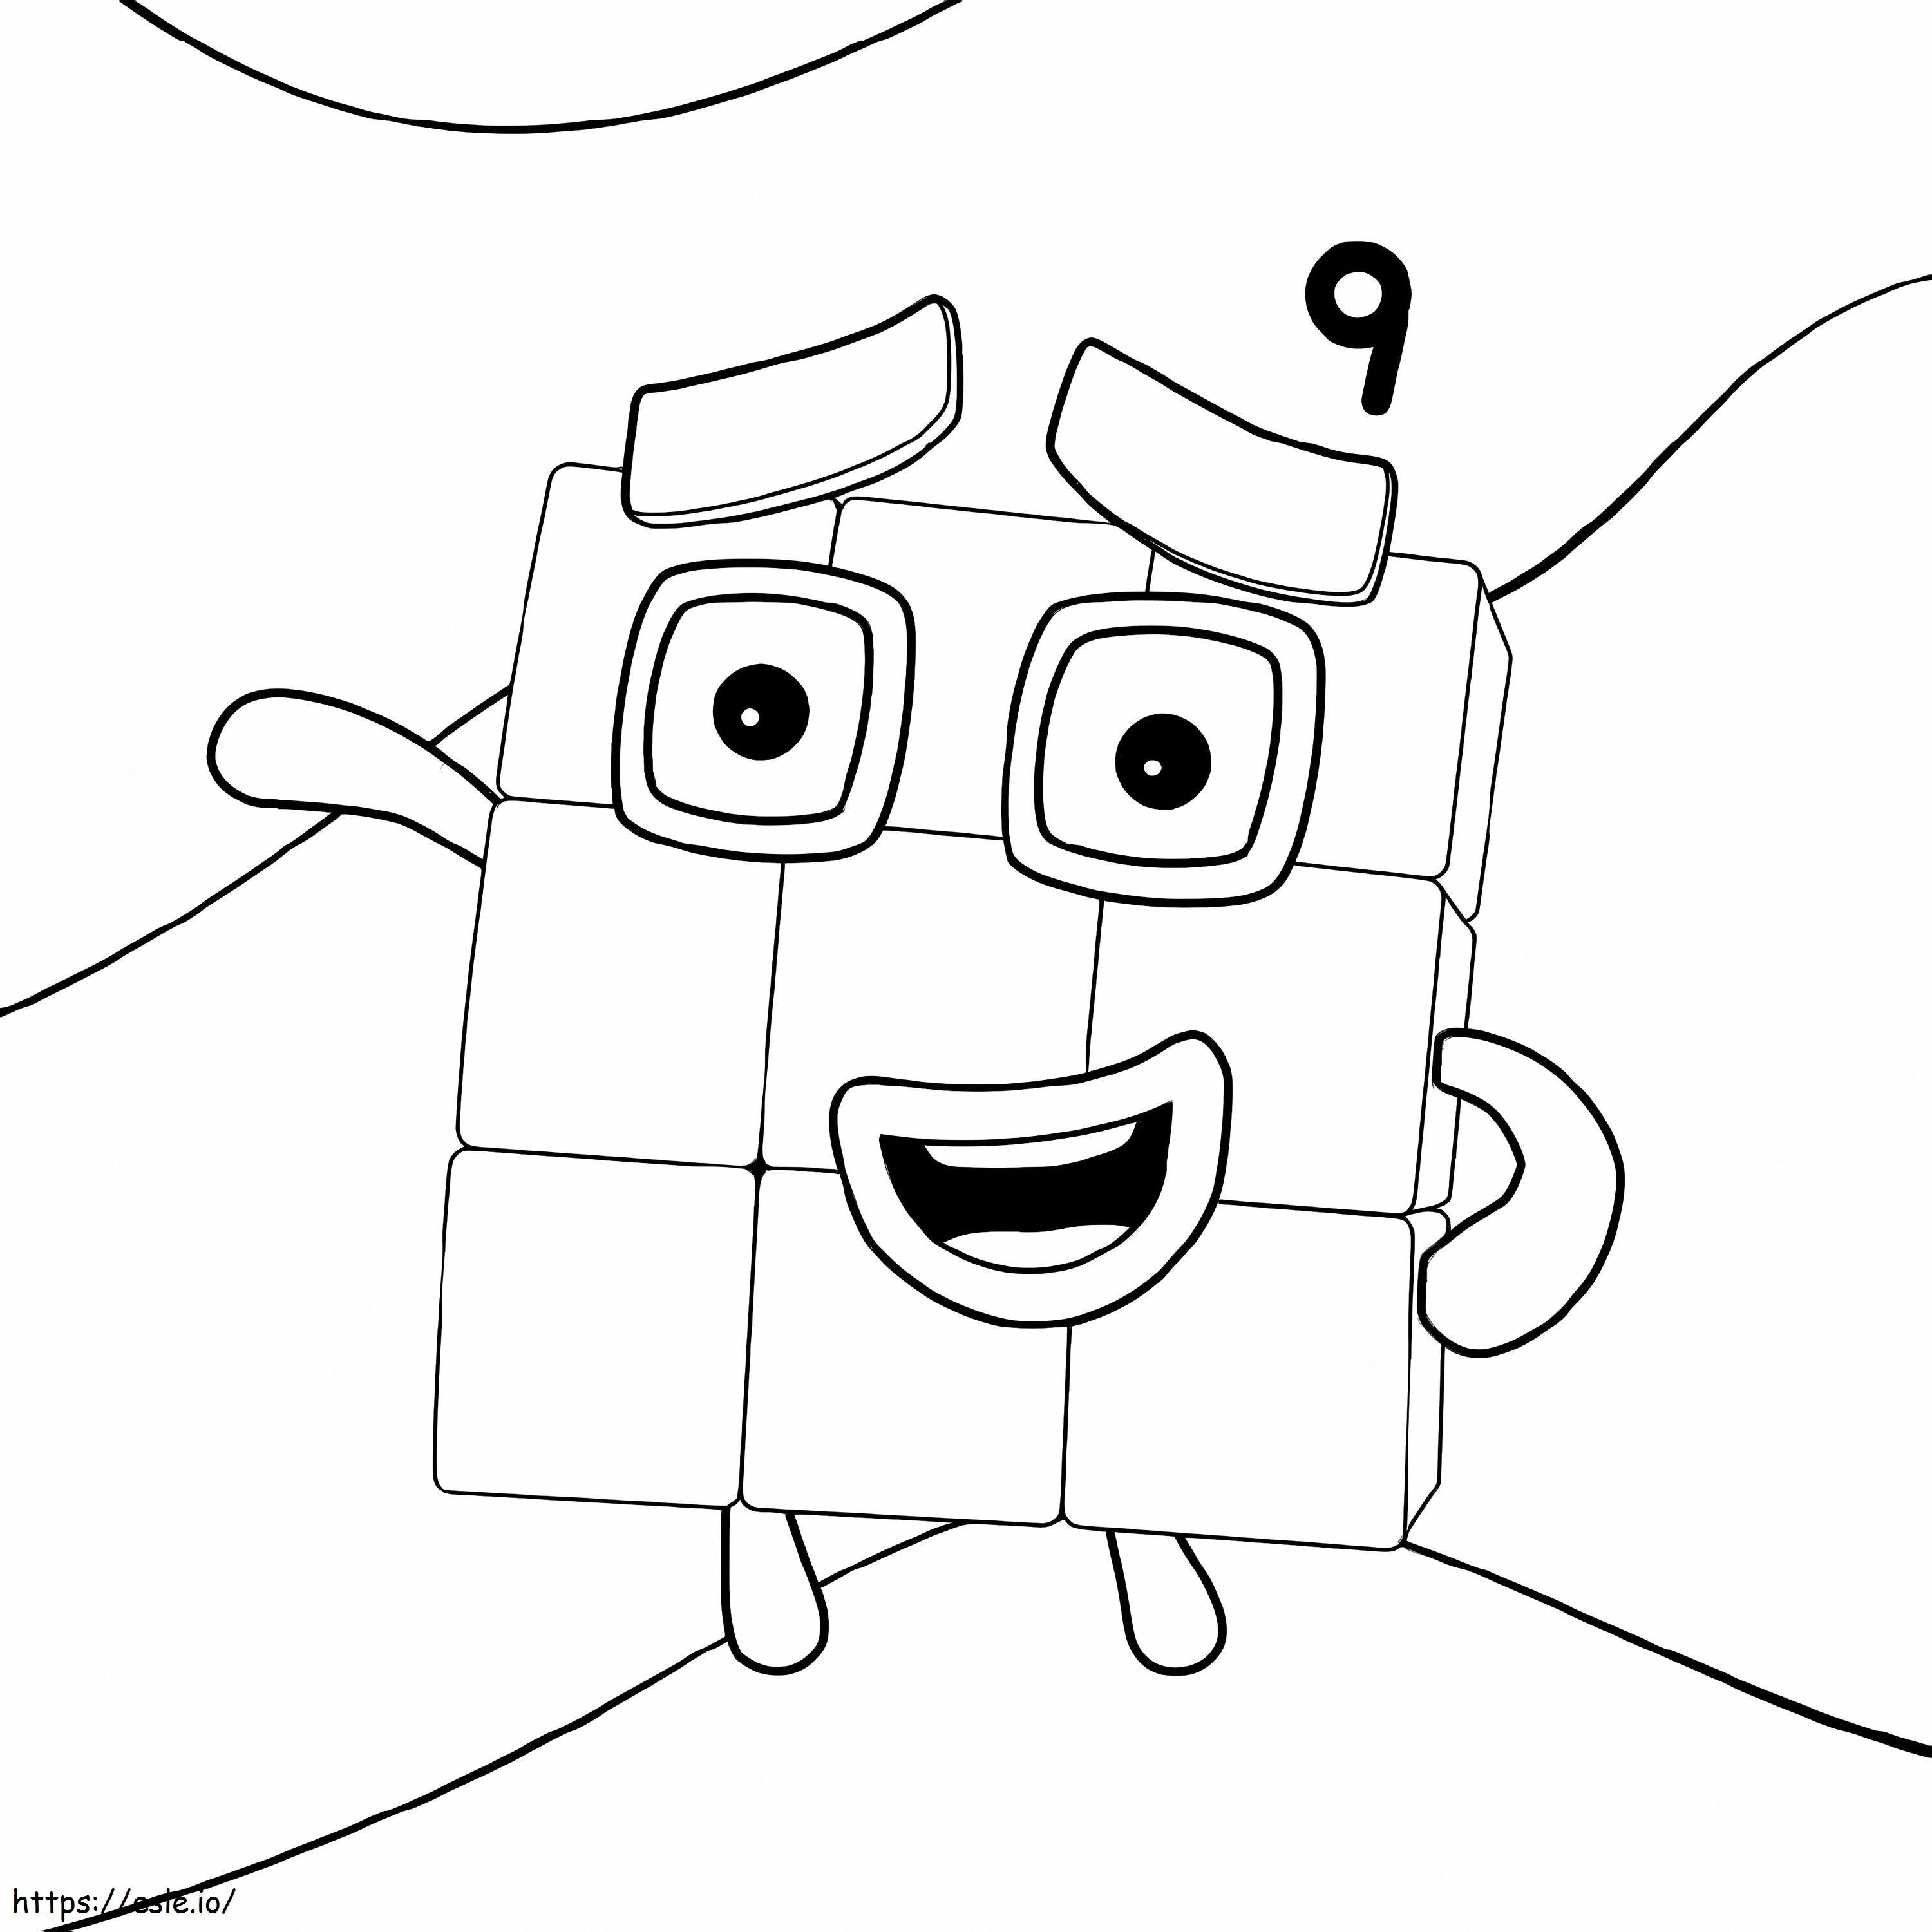 Number Blocks 9 coloring page